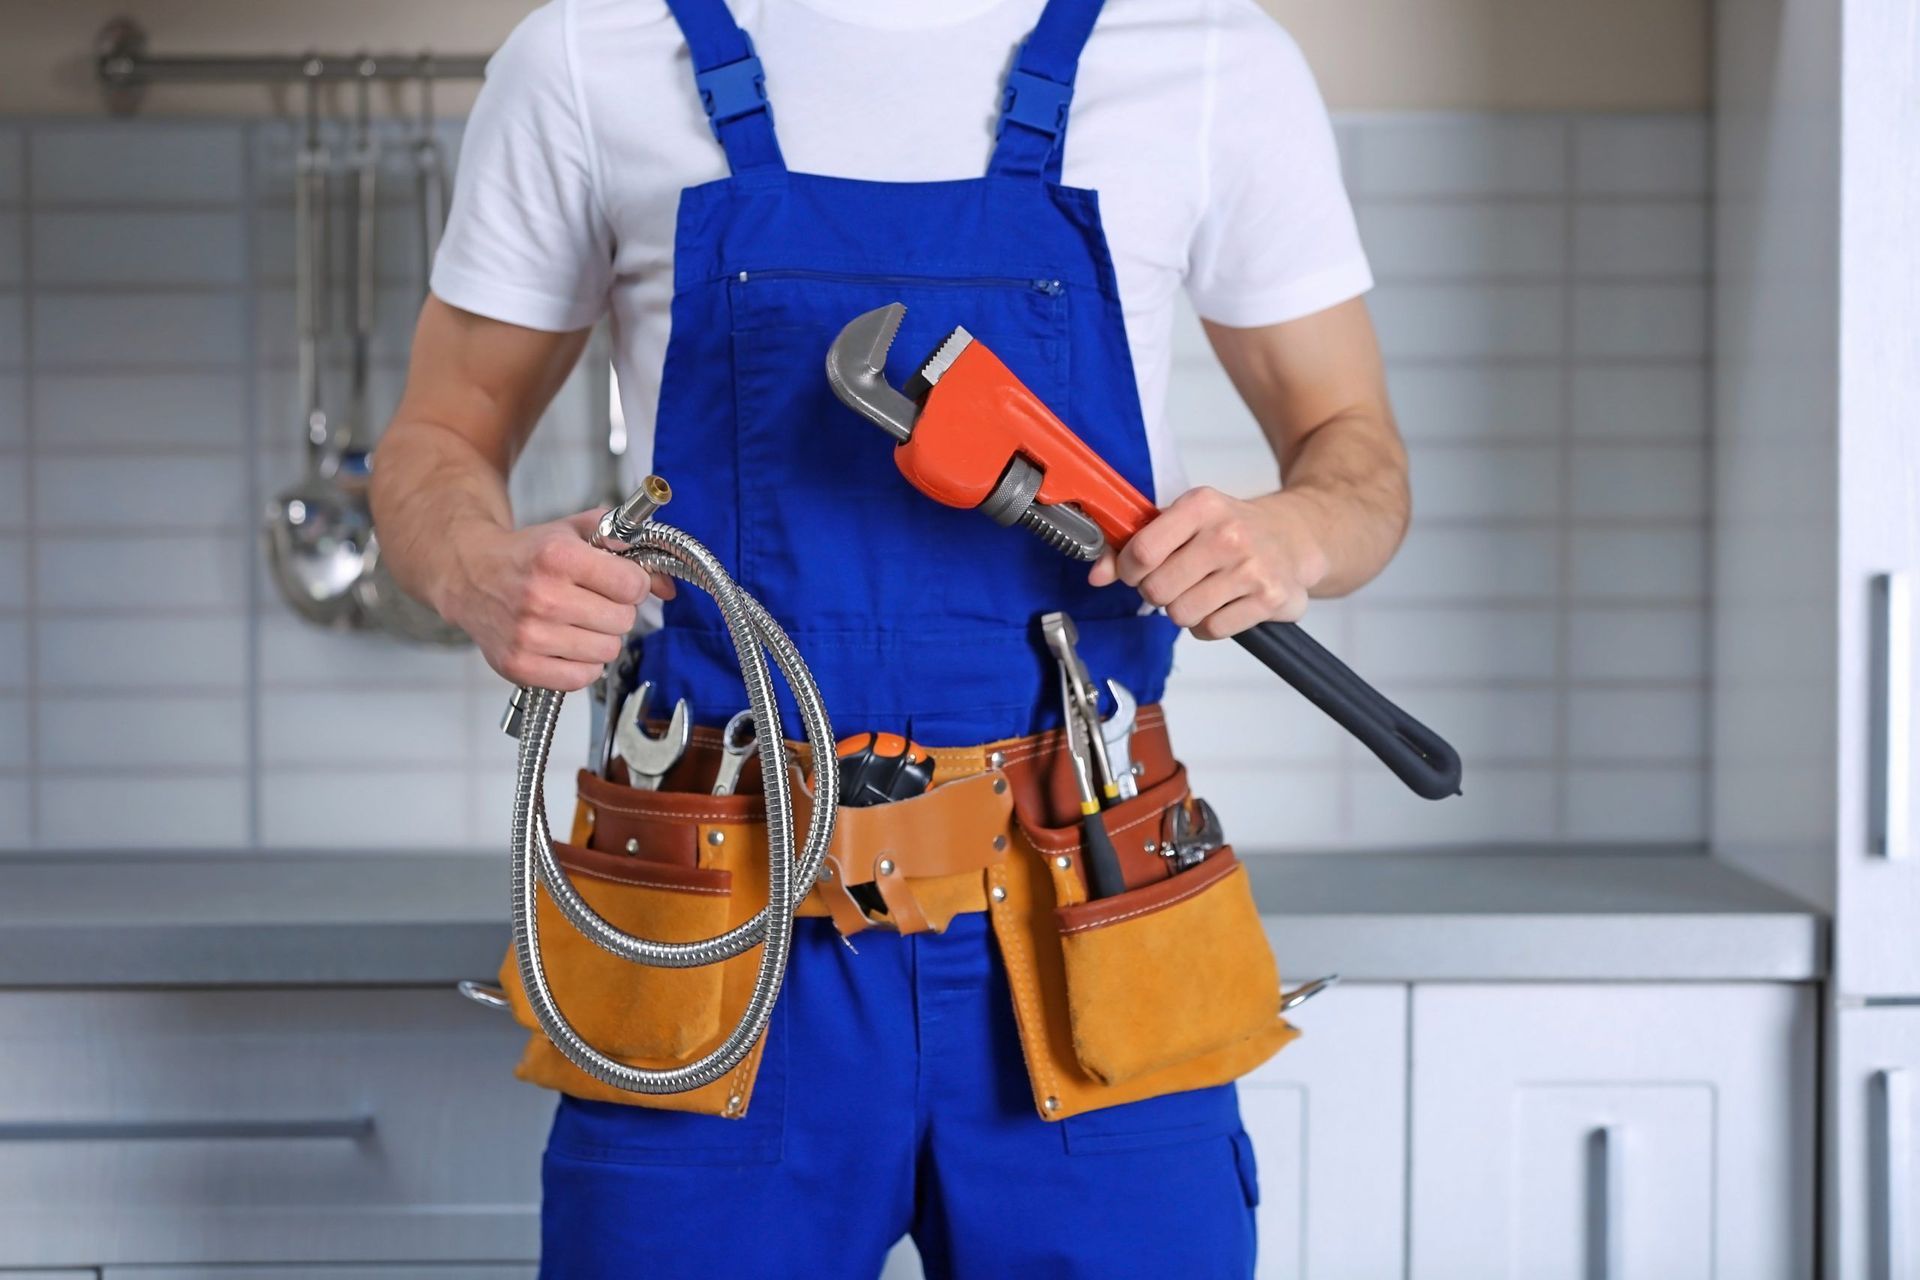 A handyman is holding a wrench and a hose for providing handyman services in NYC